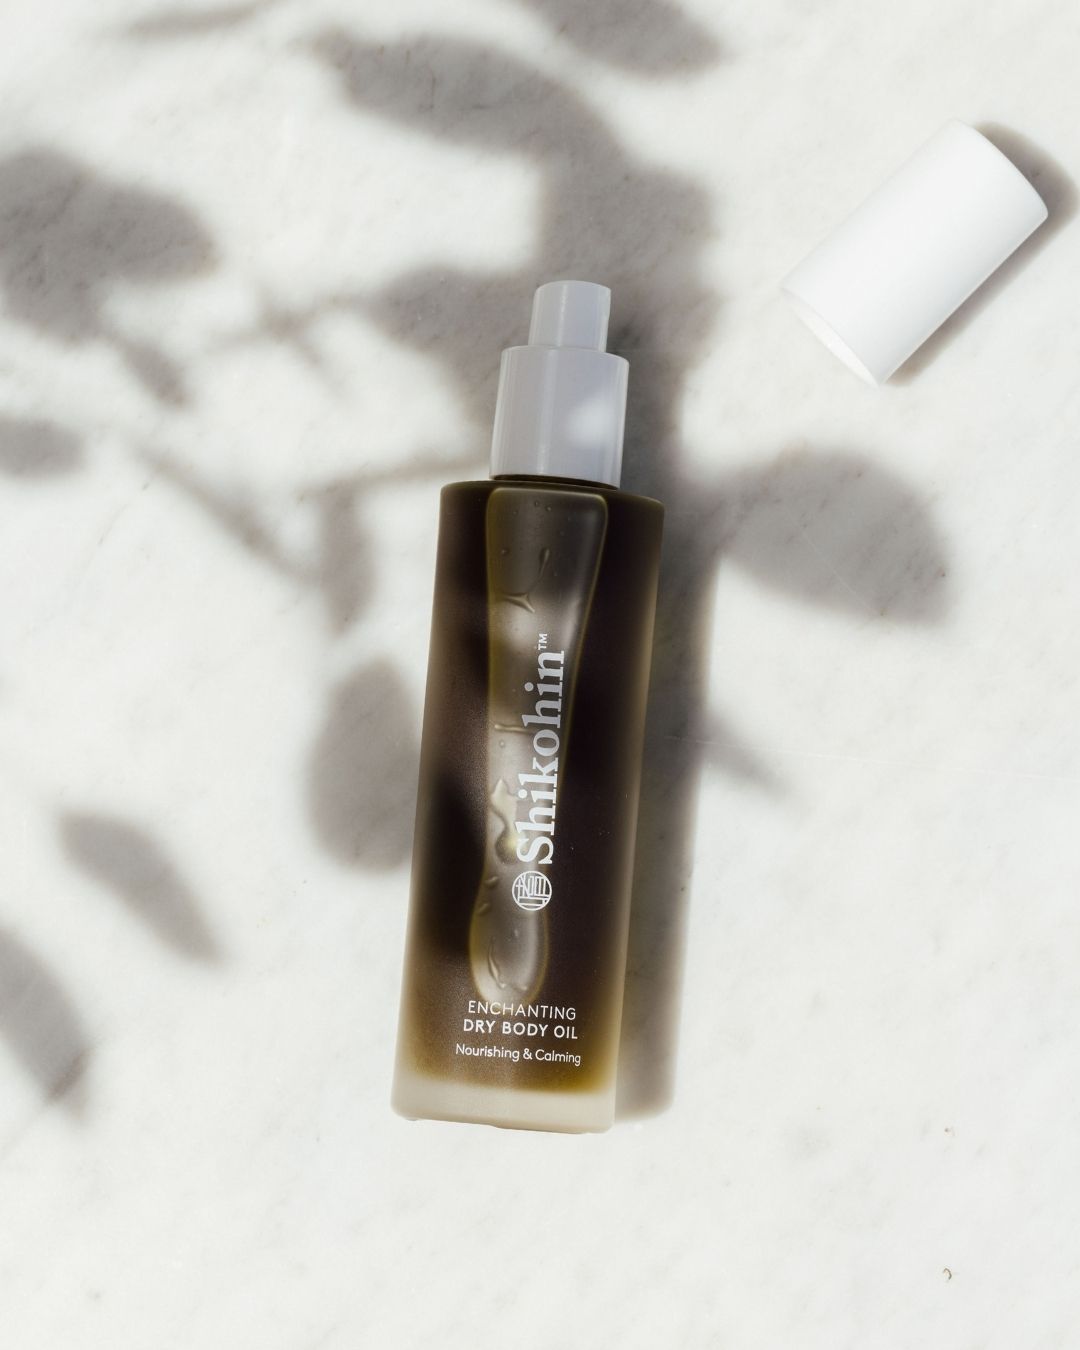 Shikohin Enchanting Dry Body Oil Soothes and Calms the Skin: Gentle Anti-inflammatory Agents